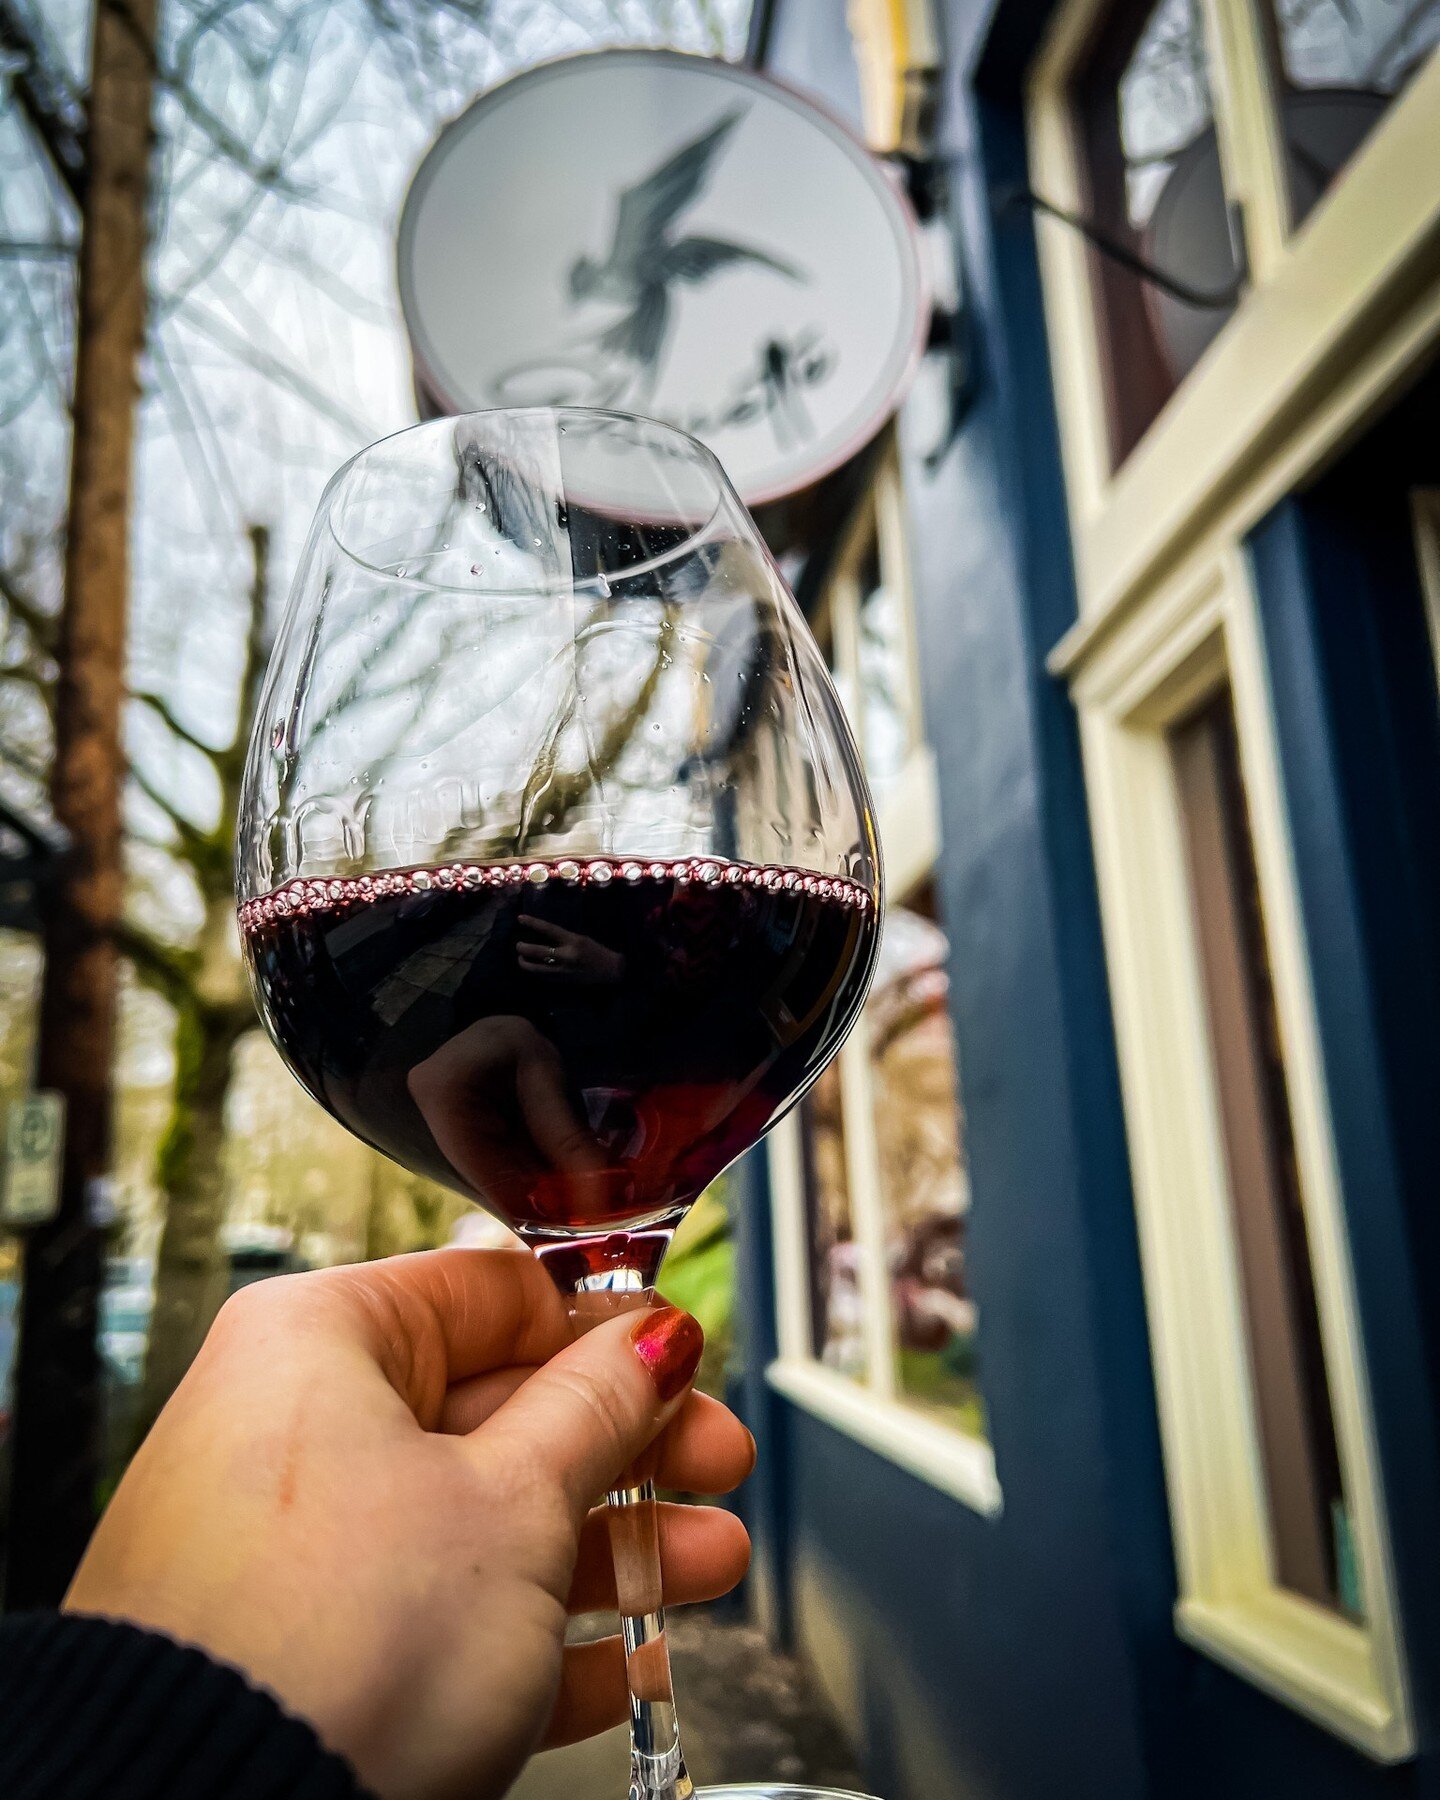 Almost Friday ✨

Wind down your week with us. 

Our wines are meticulously curated with an eye for pairing with our seasonal menu. With a focus on France and Oregon, but including many selections from around the world, there&rsquo;s something for eve